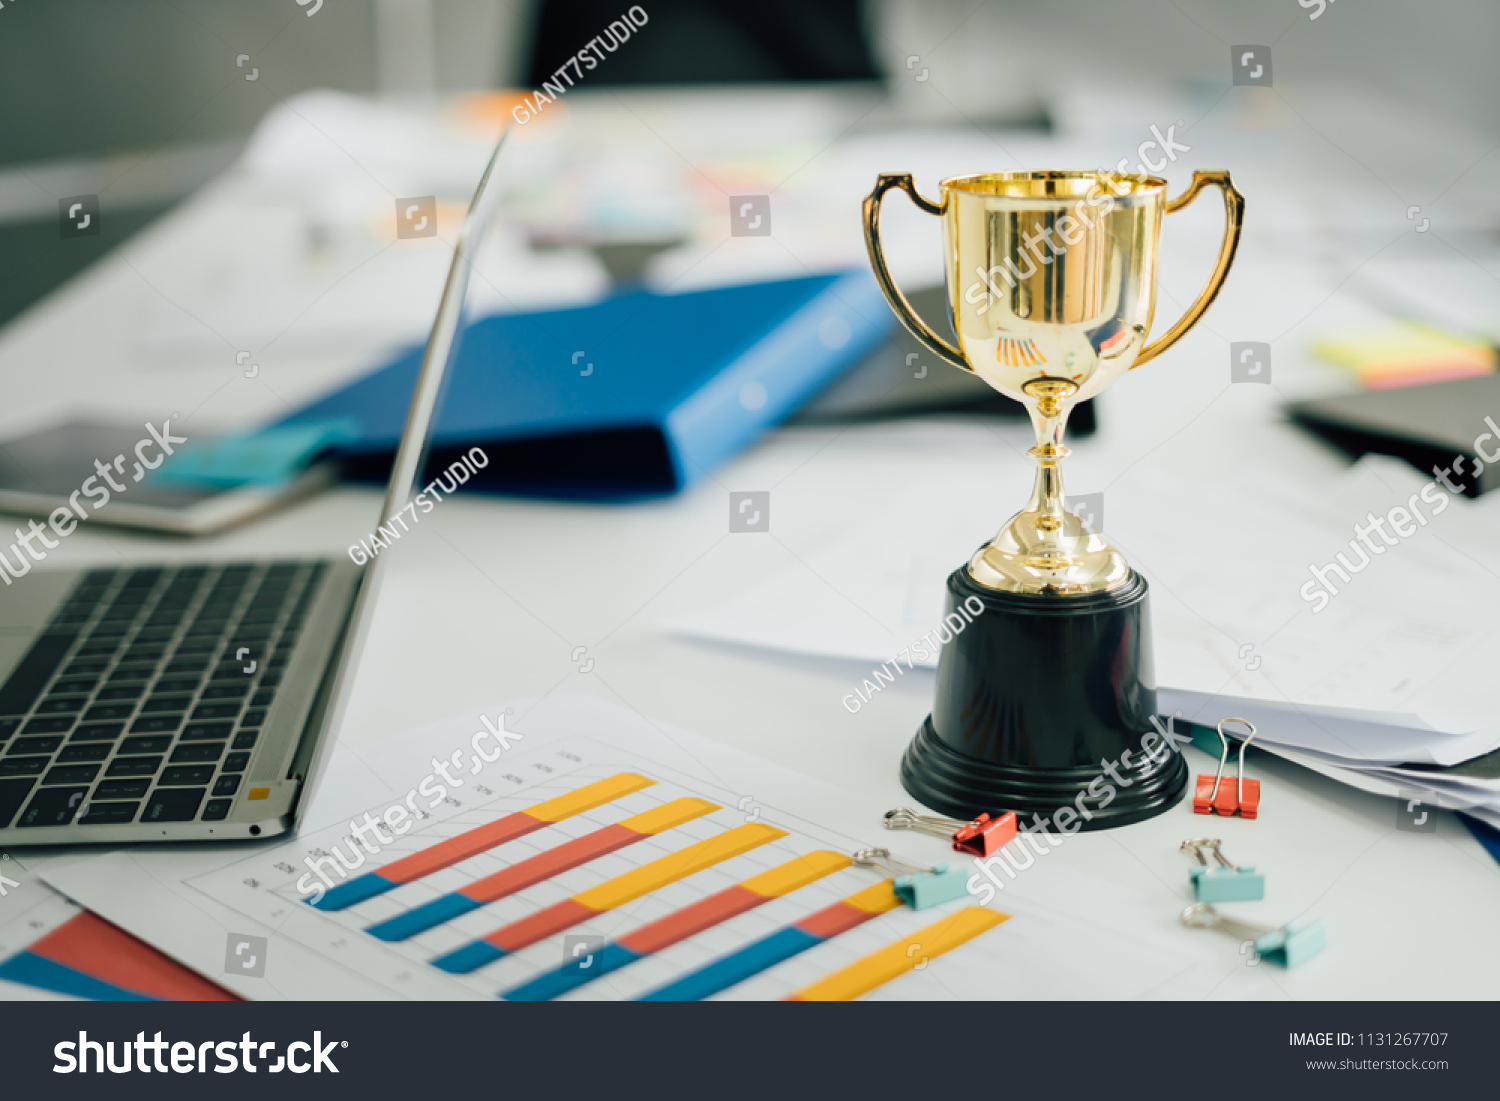 champion golden trophy on table.Award trophy on working table with document and contract #1131267707